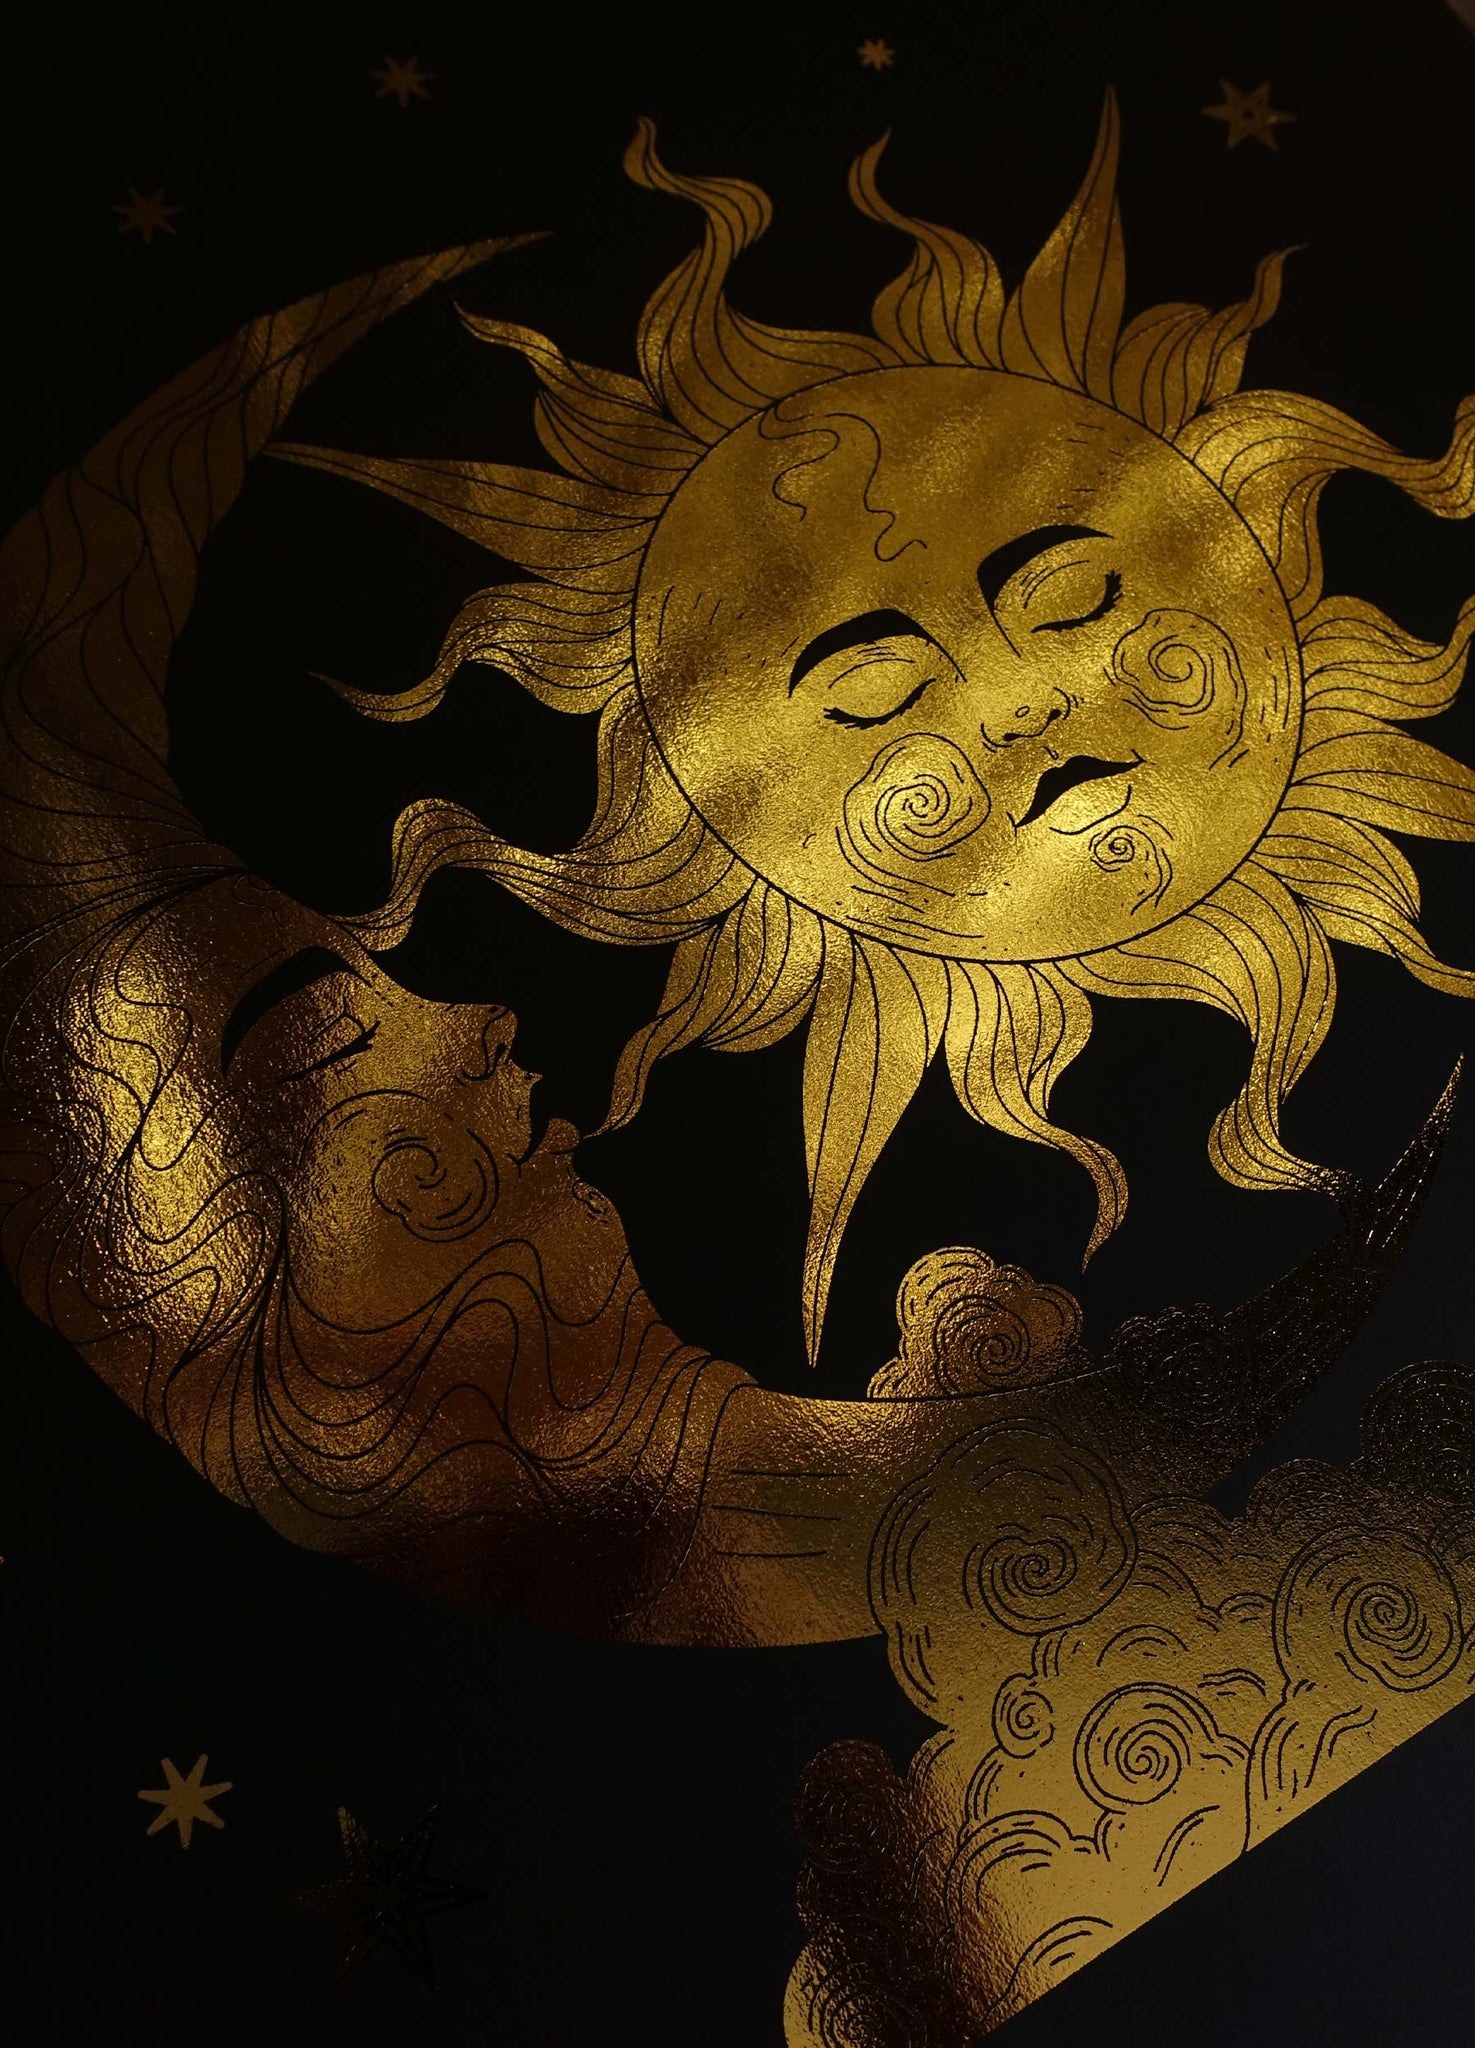 Sun and Moon soulmates gold foil on black paper art print by Cocorrina & Co